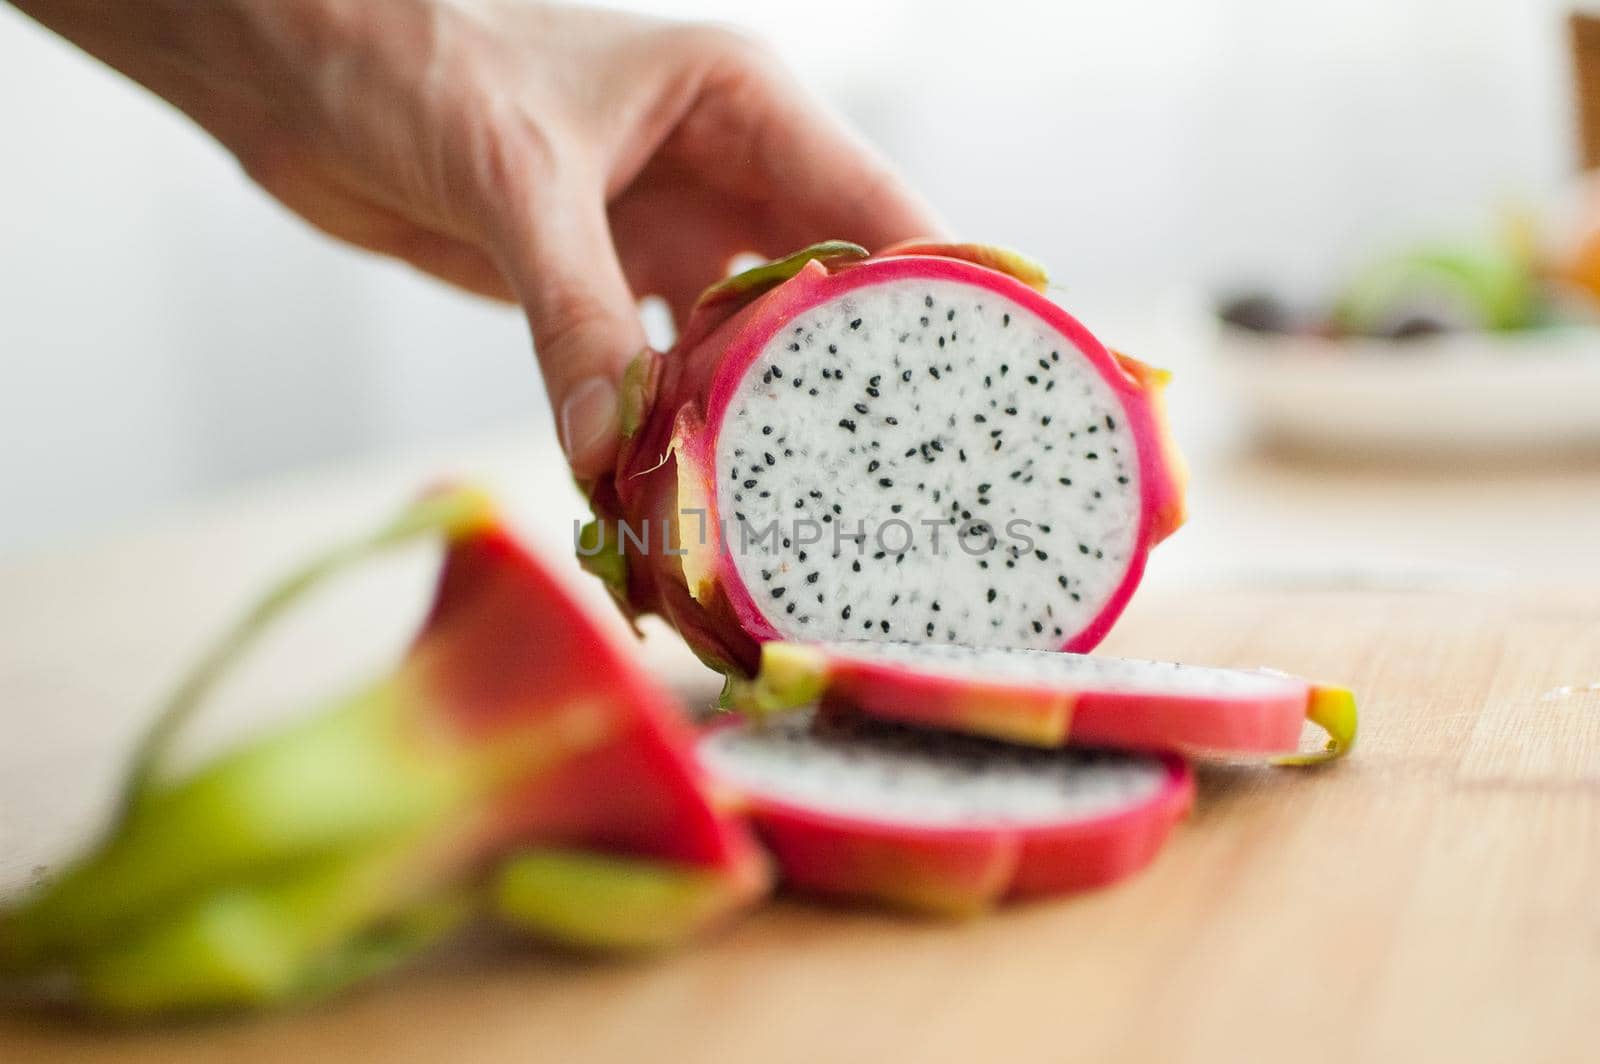 Female hands is cutting a dragon fruit or pitaya with pink skin and white pulp with black seeds on wooden cut board on the table. Exotic fruits, healthy eating concept.